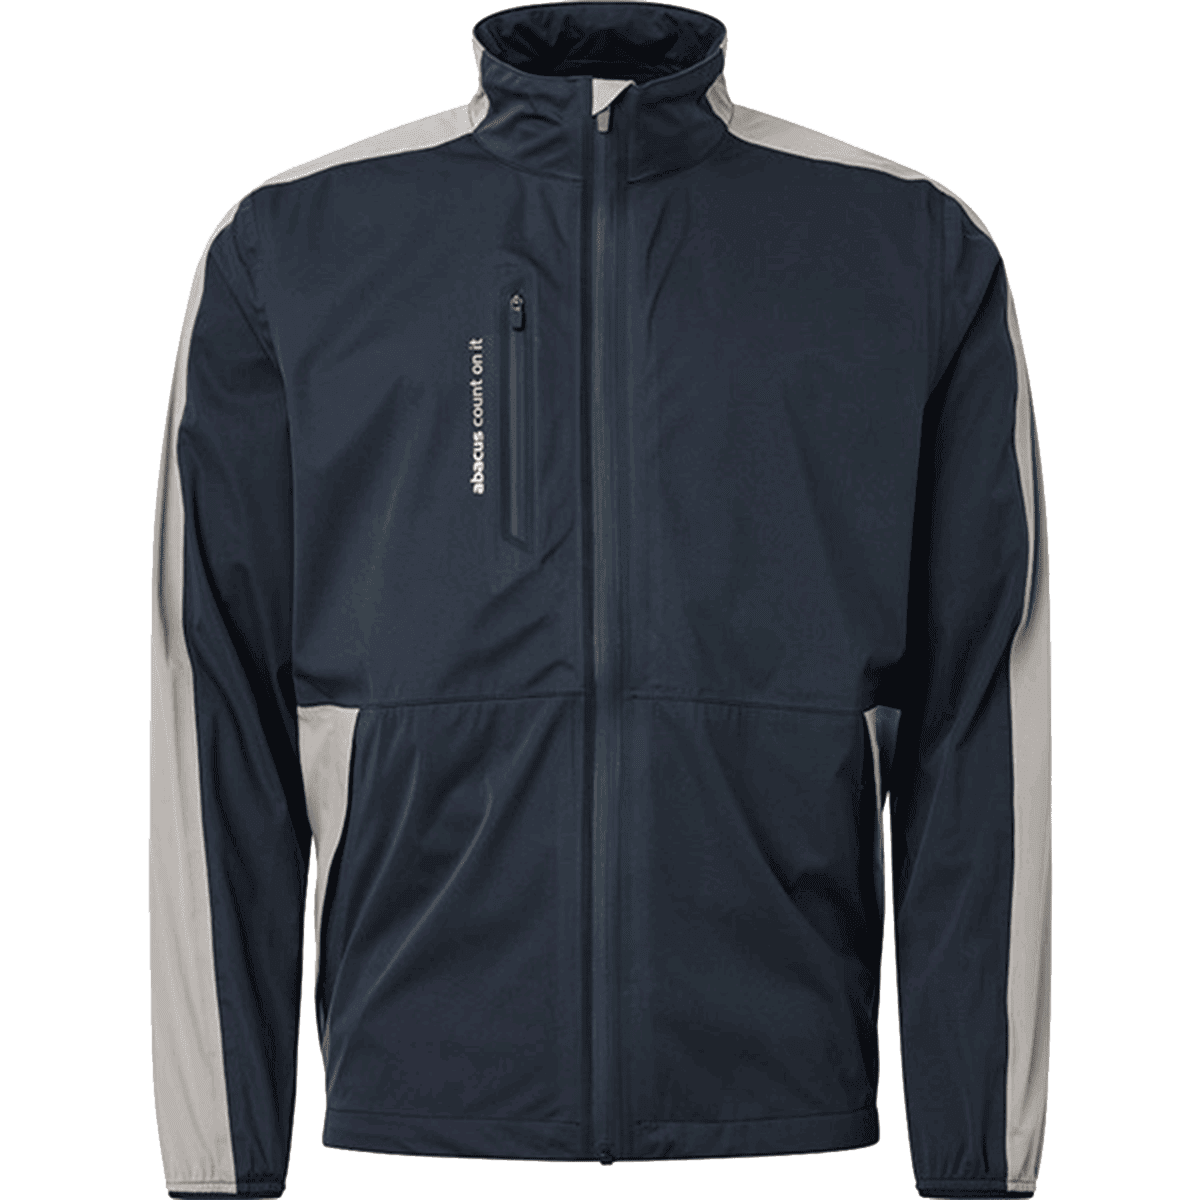 Abacus Bounce rain jacket review - National Club Golfer